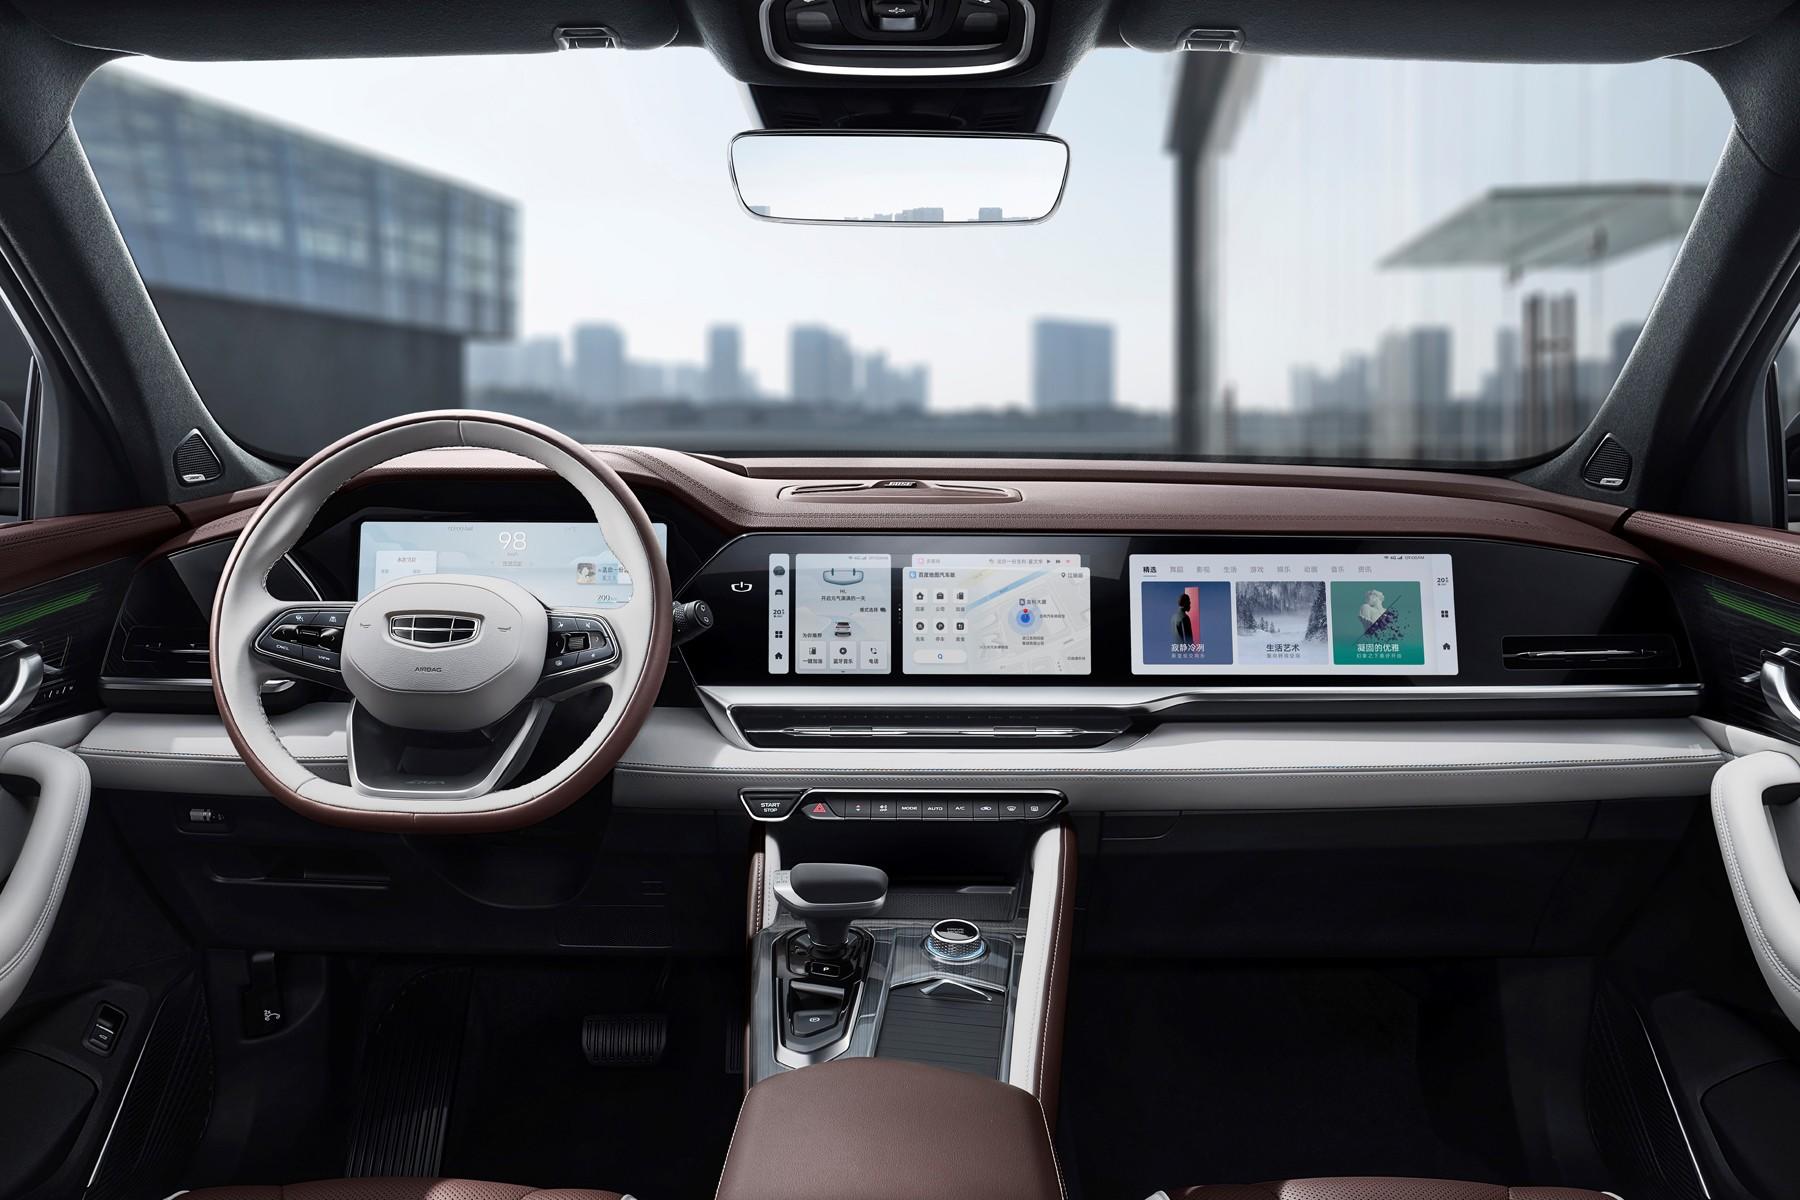 Cockpit solution developed by Visteon, ECARX and Qualcomm debuts in Geely Auto's flagship SUV